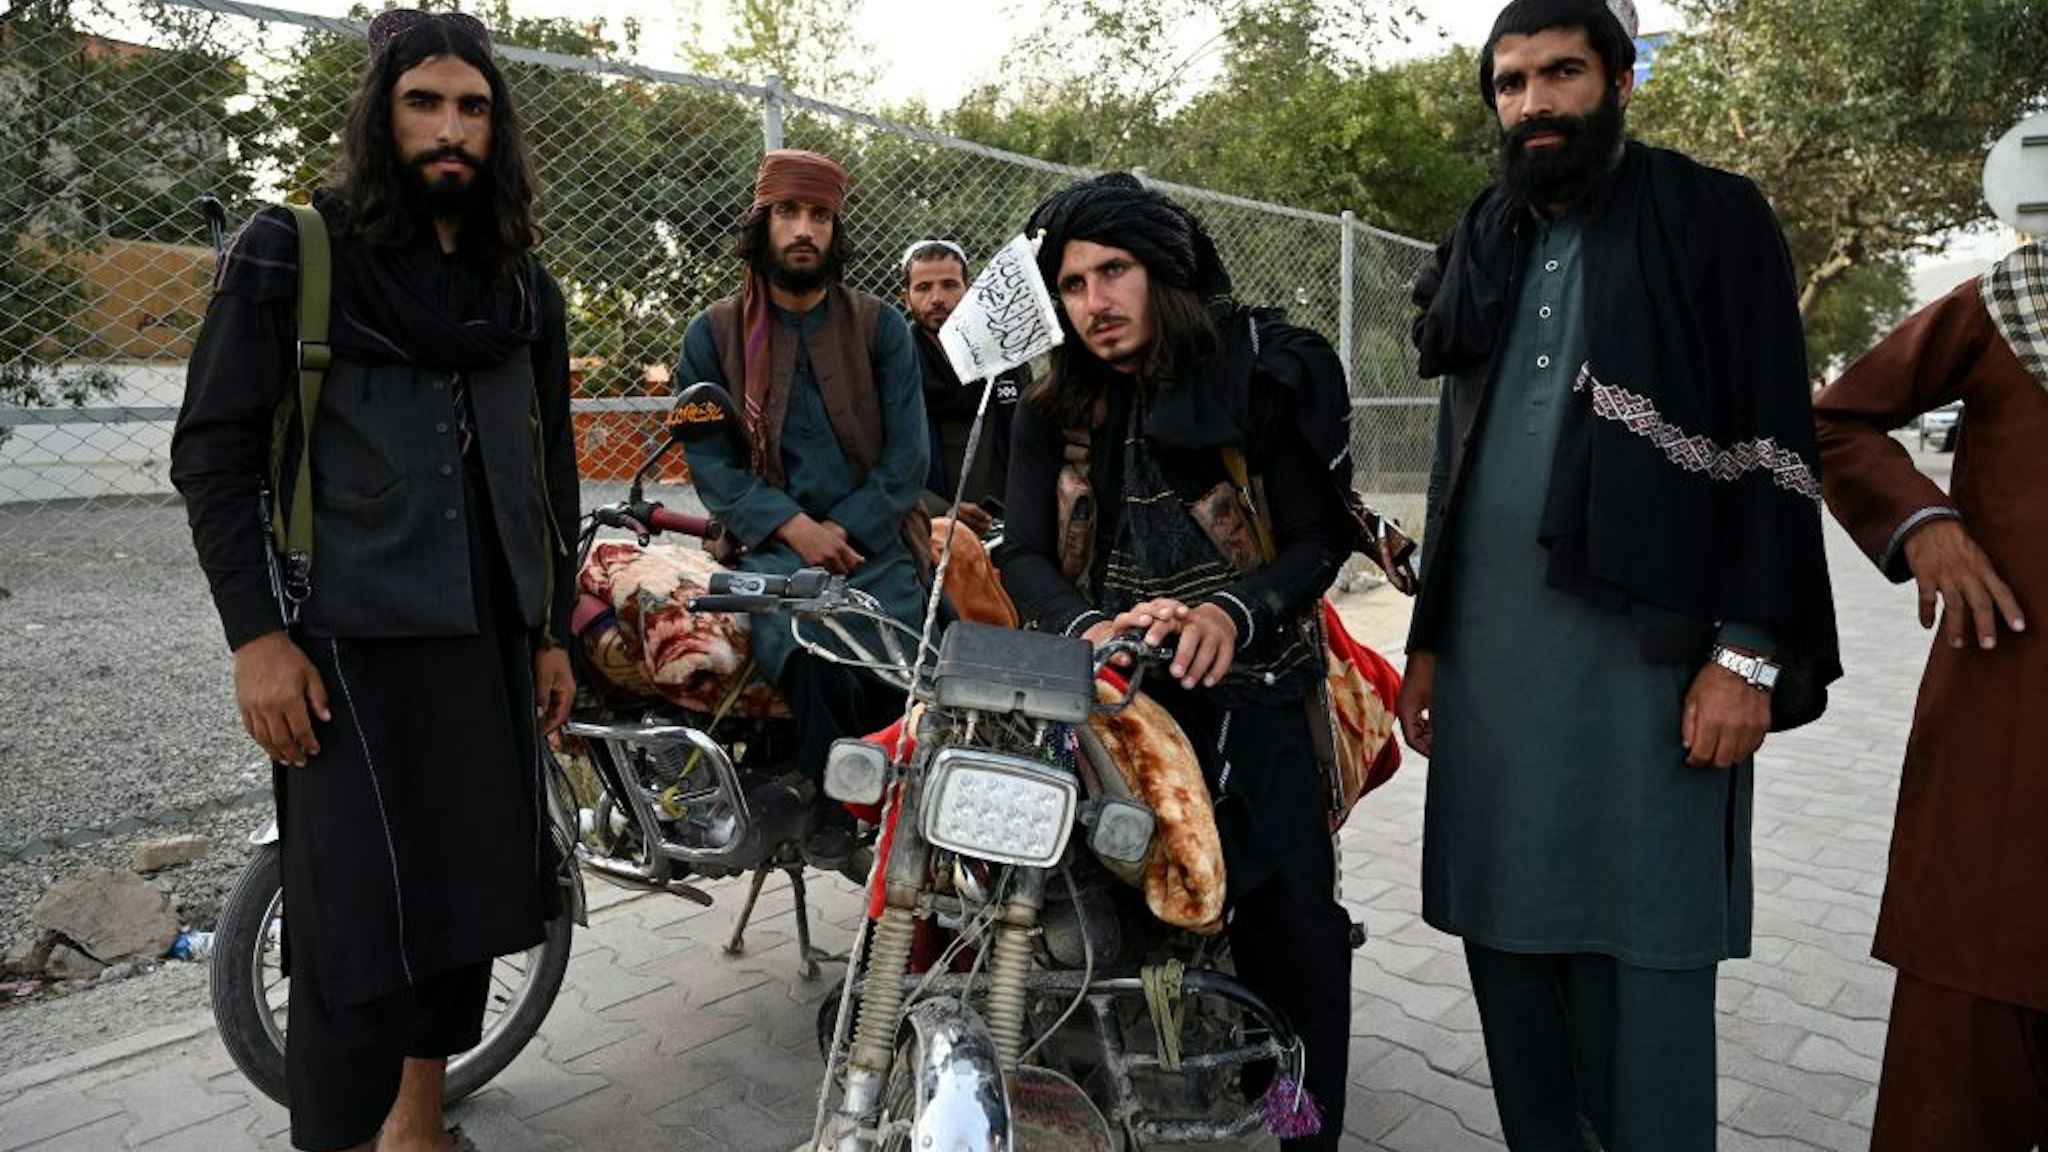 Taliban fighters stand along a road in Kabul on August 18, 2021, after the Taliban's military takeover of Afghanistan. (Photo by Wakil KOHSAR / AFP) (Photo by WAKIL KOHSAR/AFP via Getty Images)